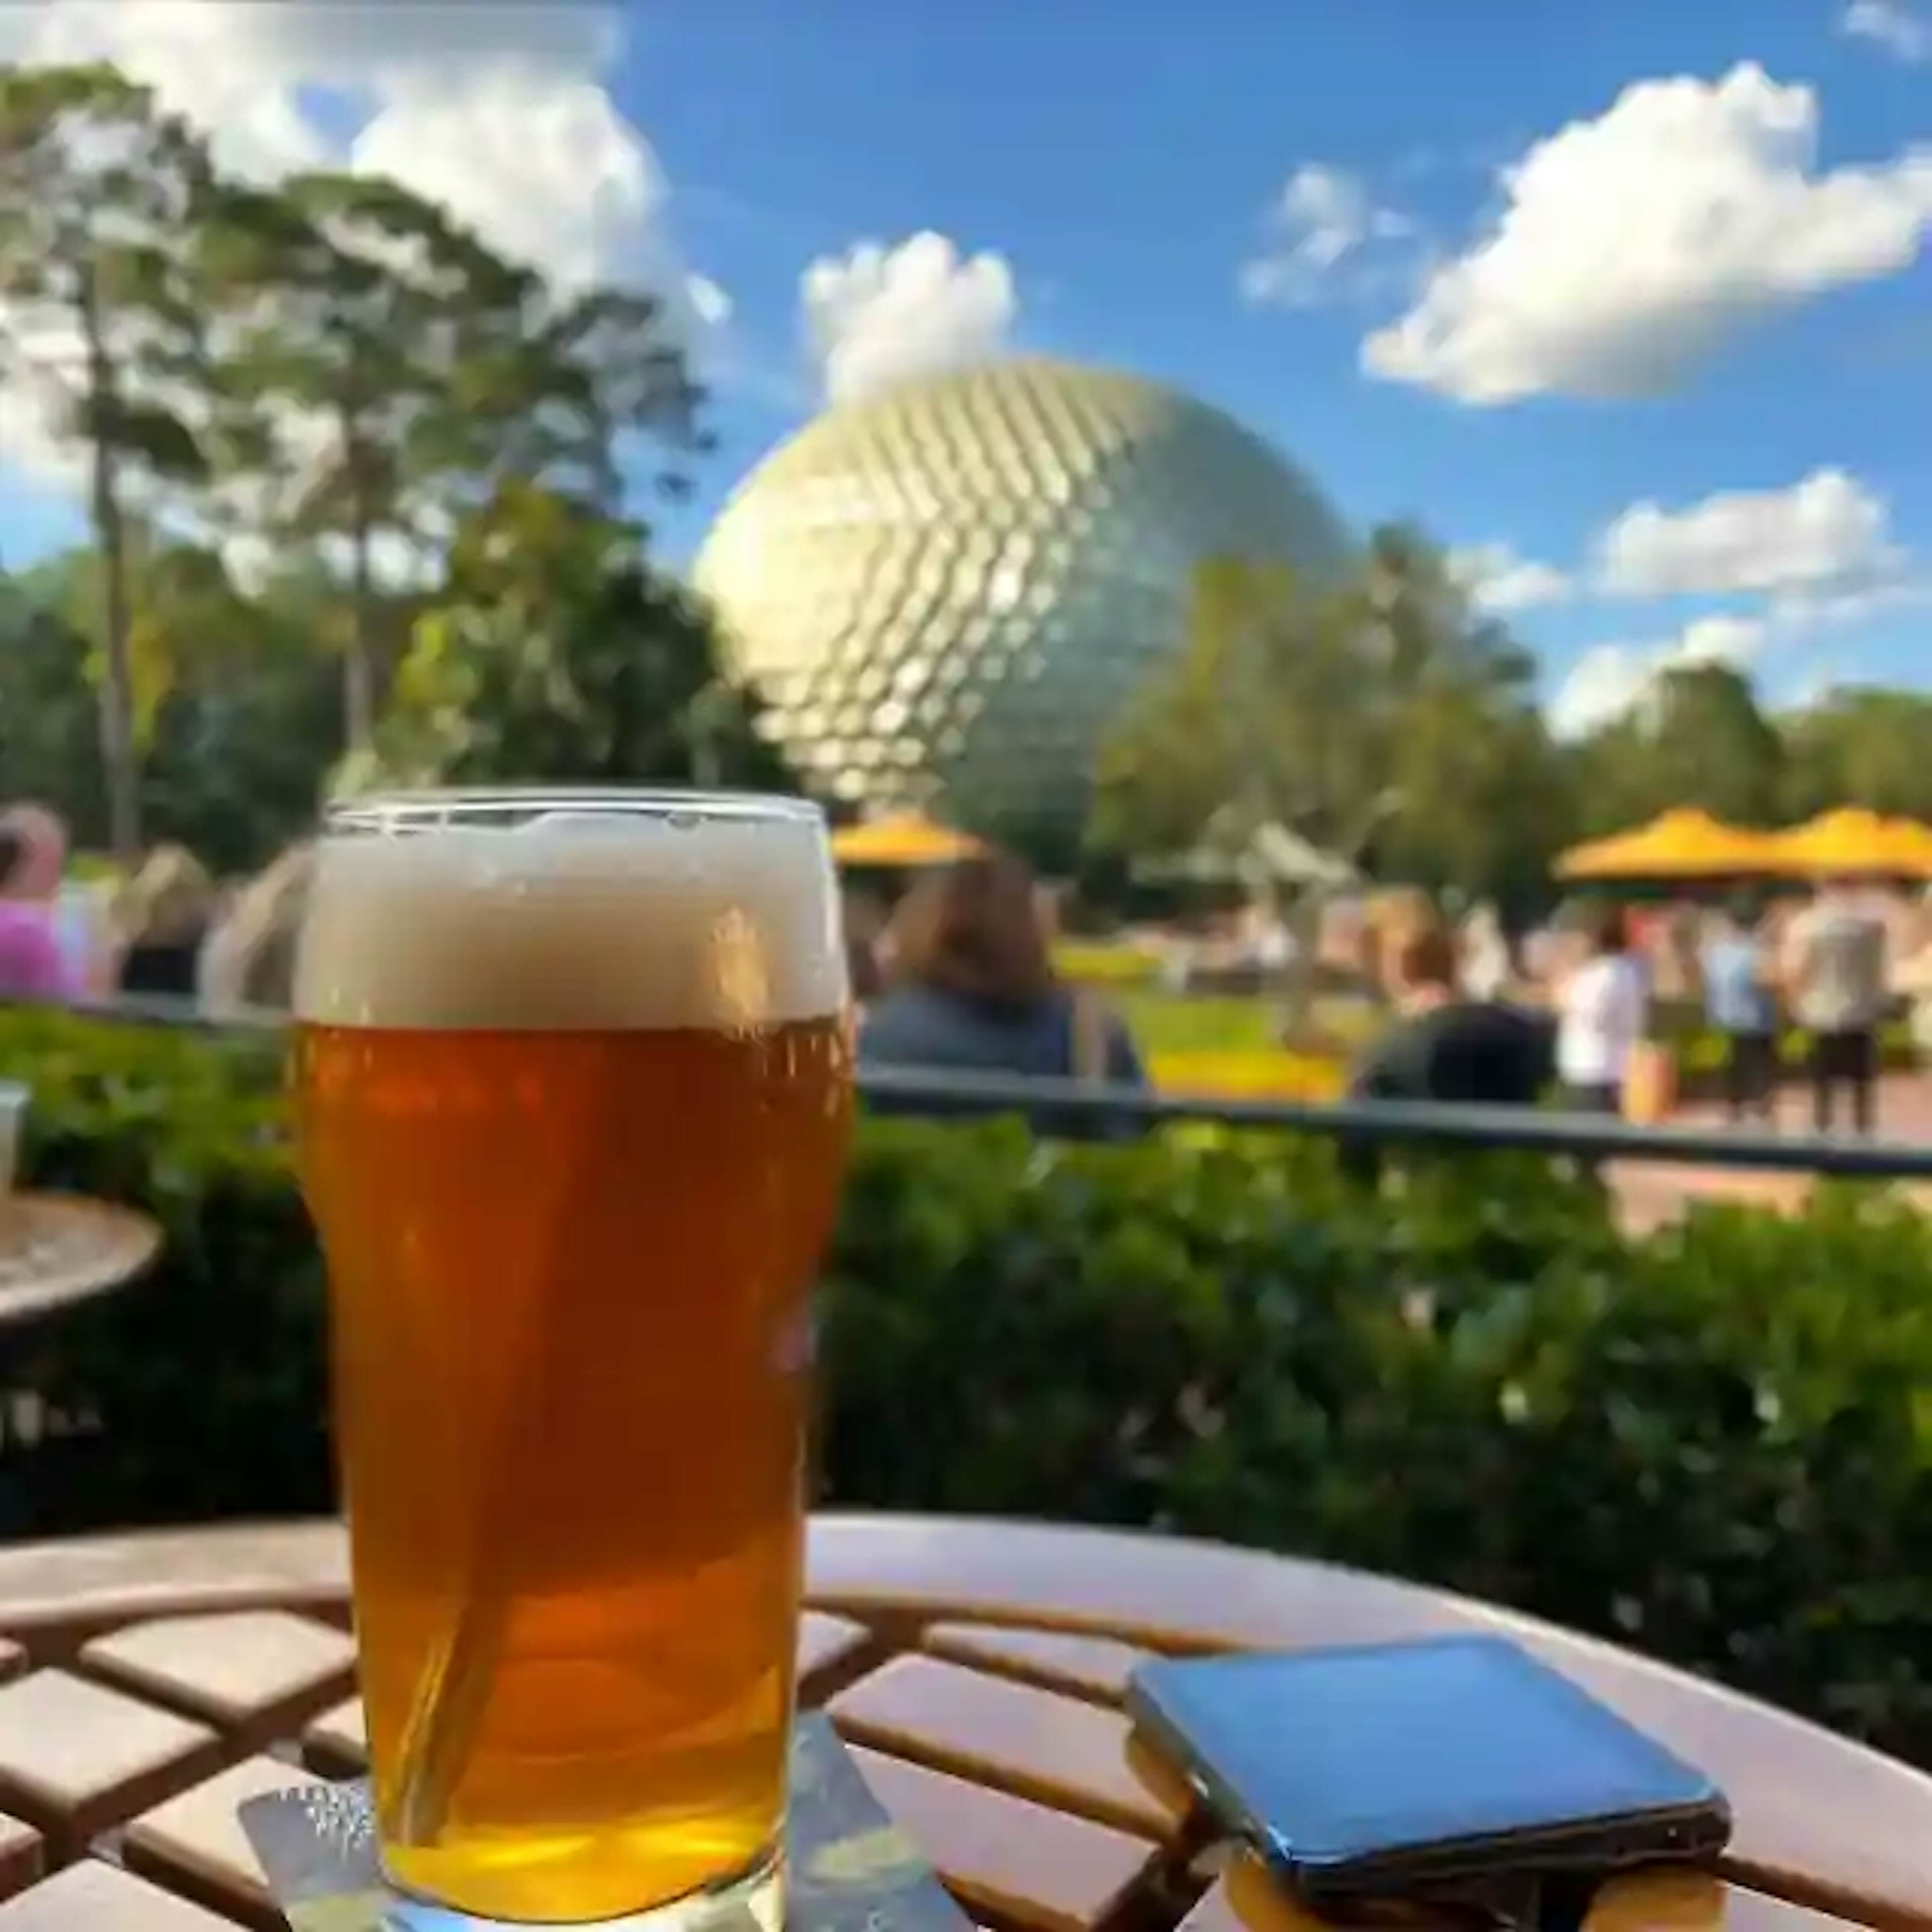 'Round the World at Epcot